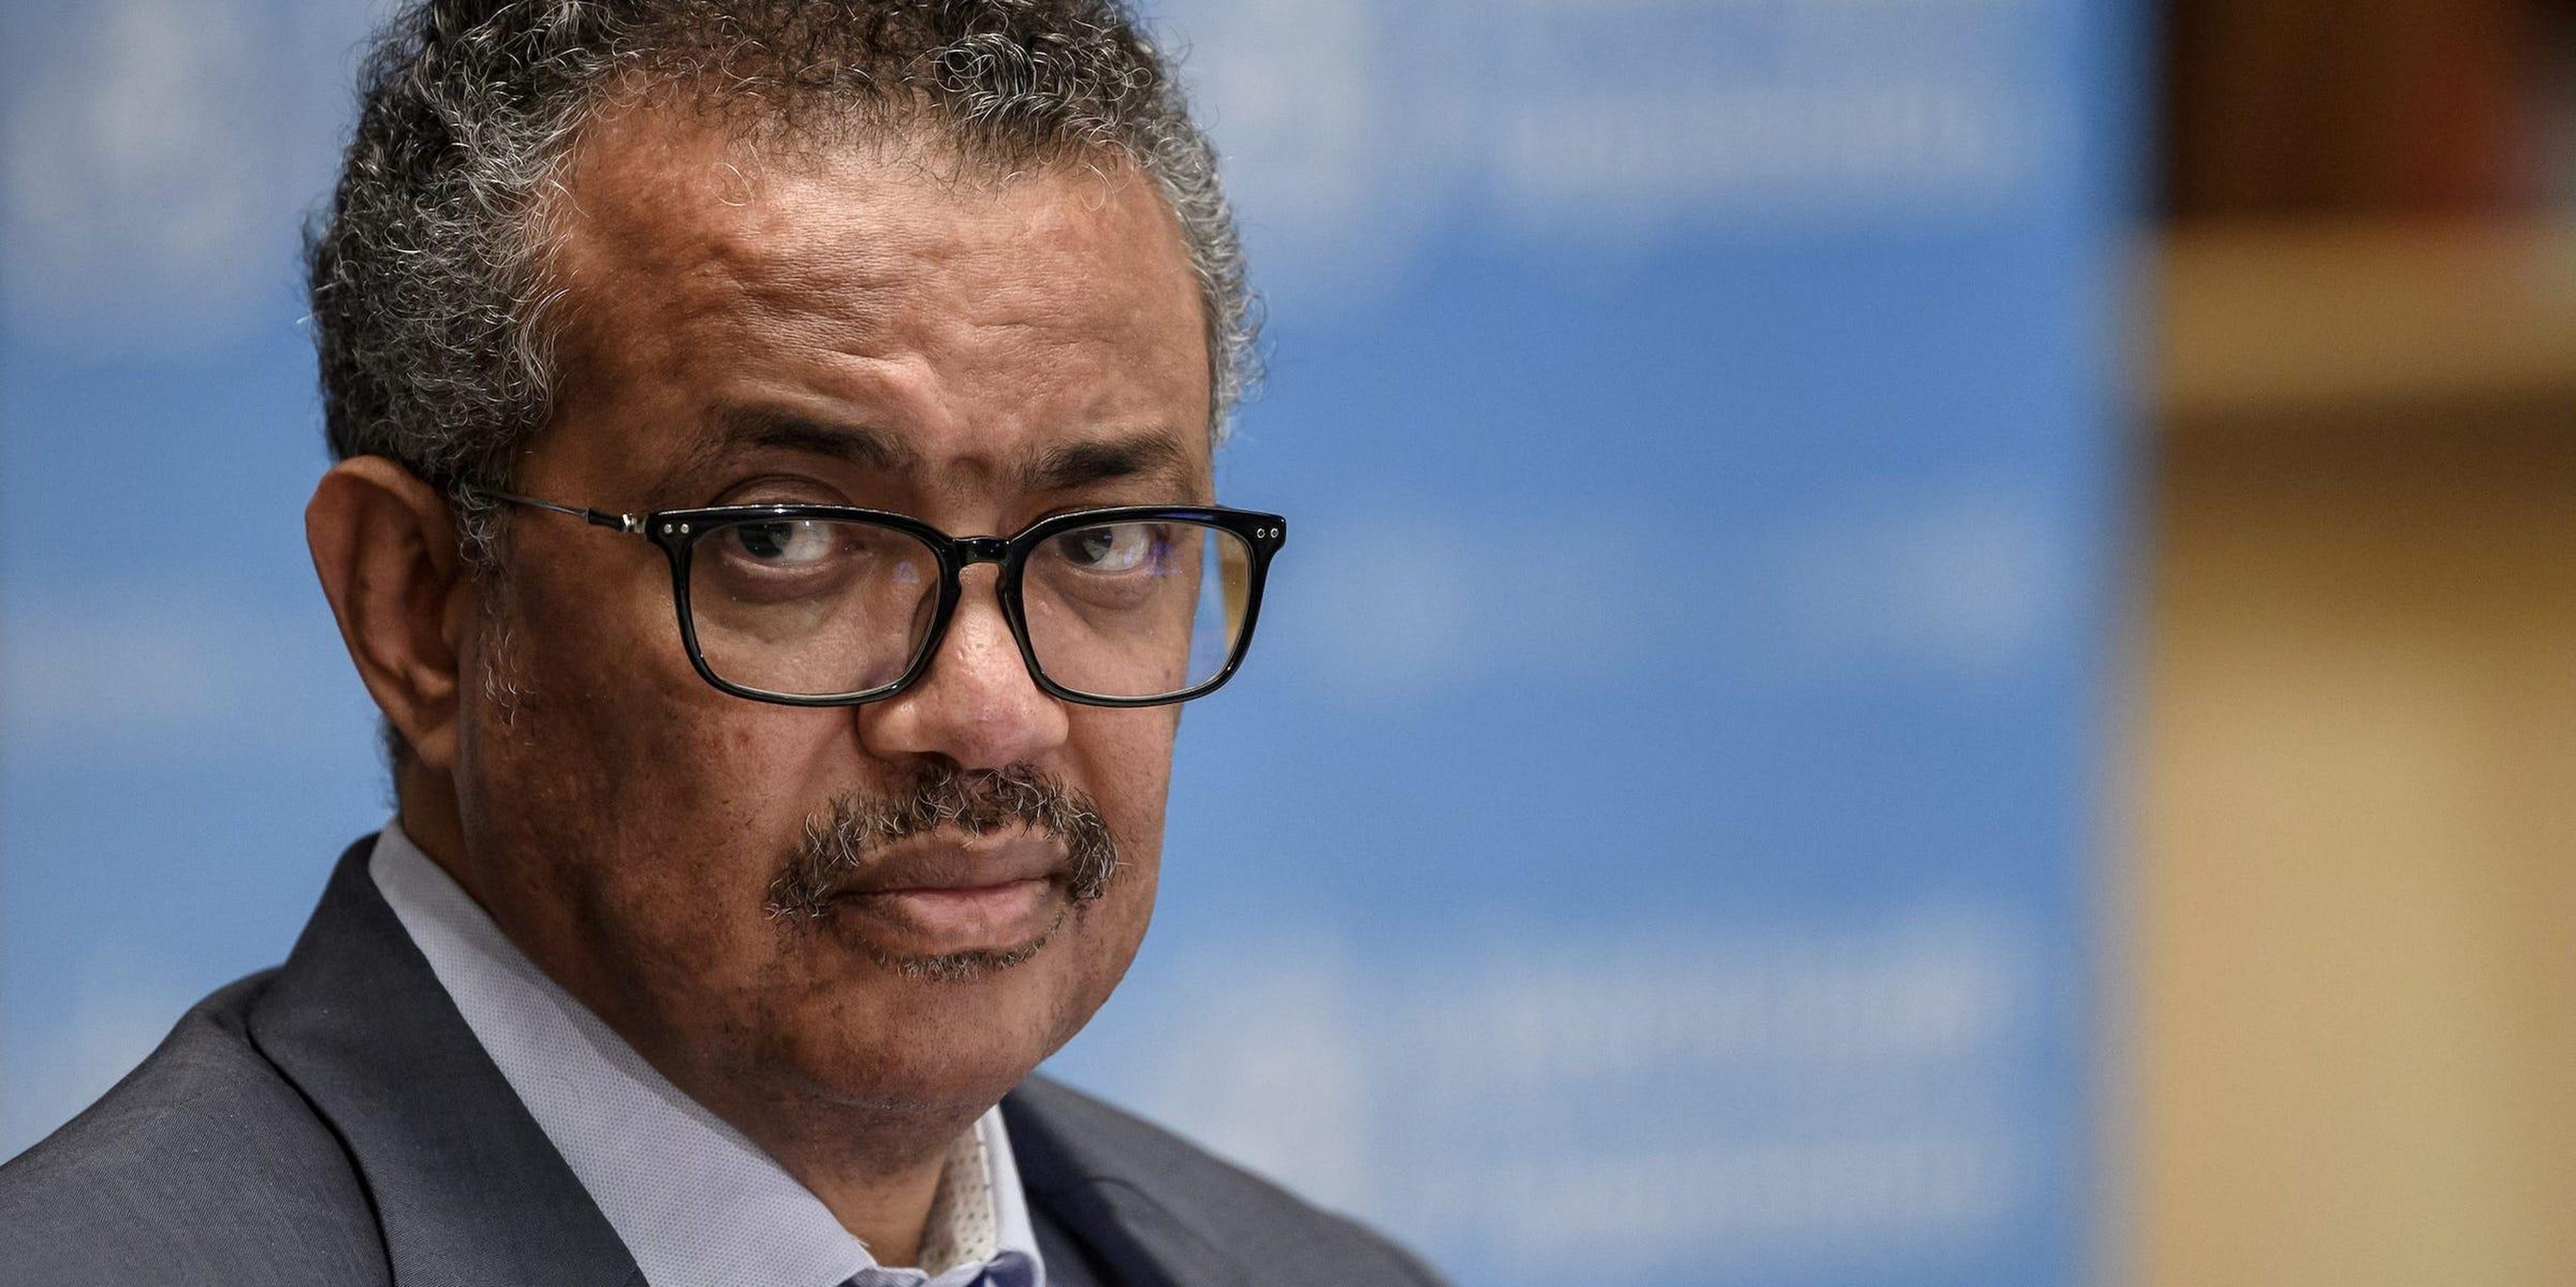 World Health Organization (WHO) Director-General Tedros Adhanom Ghebreyesus attends a news conference organized by Geneva Association of United Nations Correspondents (ACANU) amid the COVID-19 outbreak, caused by the novel coronavirus, at the WHO